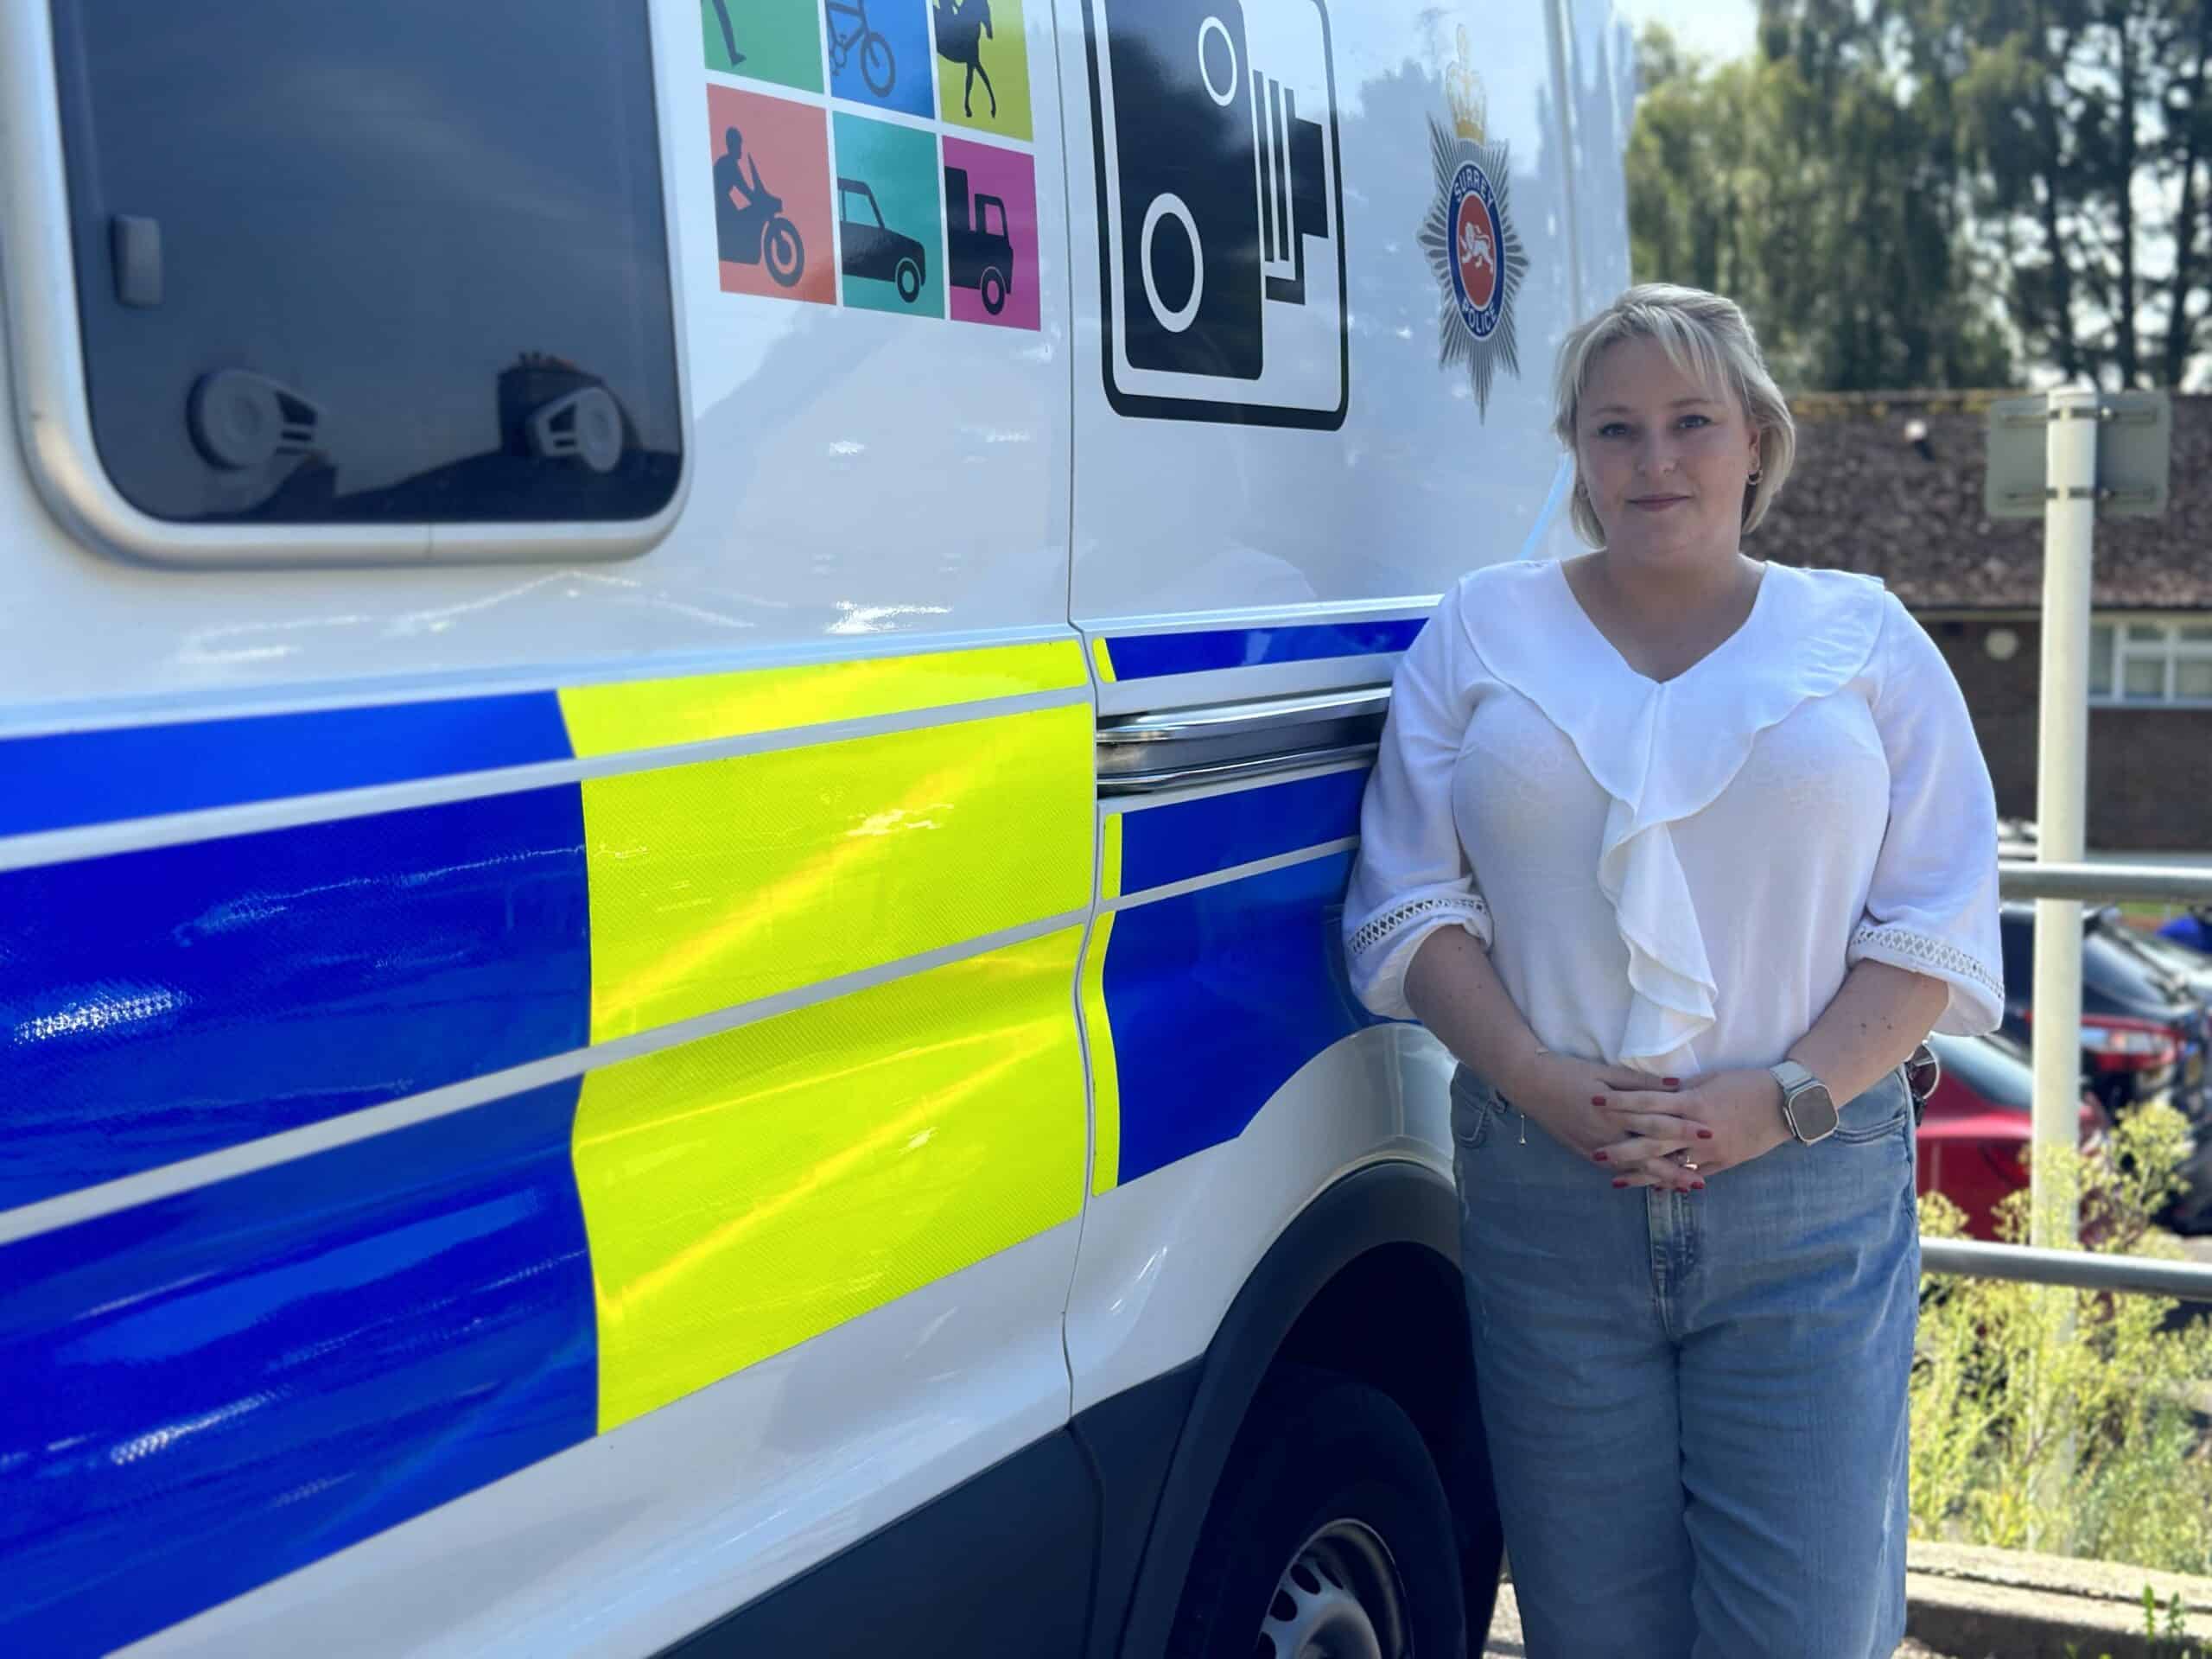 Police and Crime Commissioner Lisa Townsend next to police van